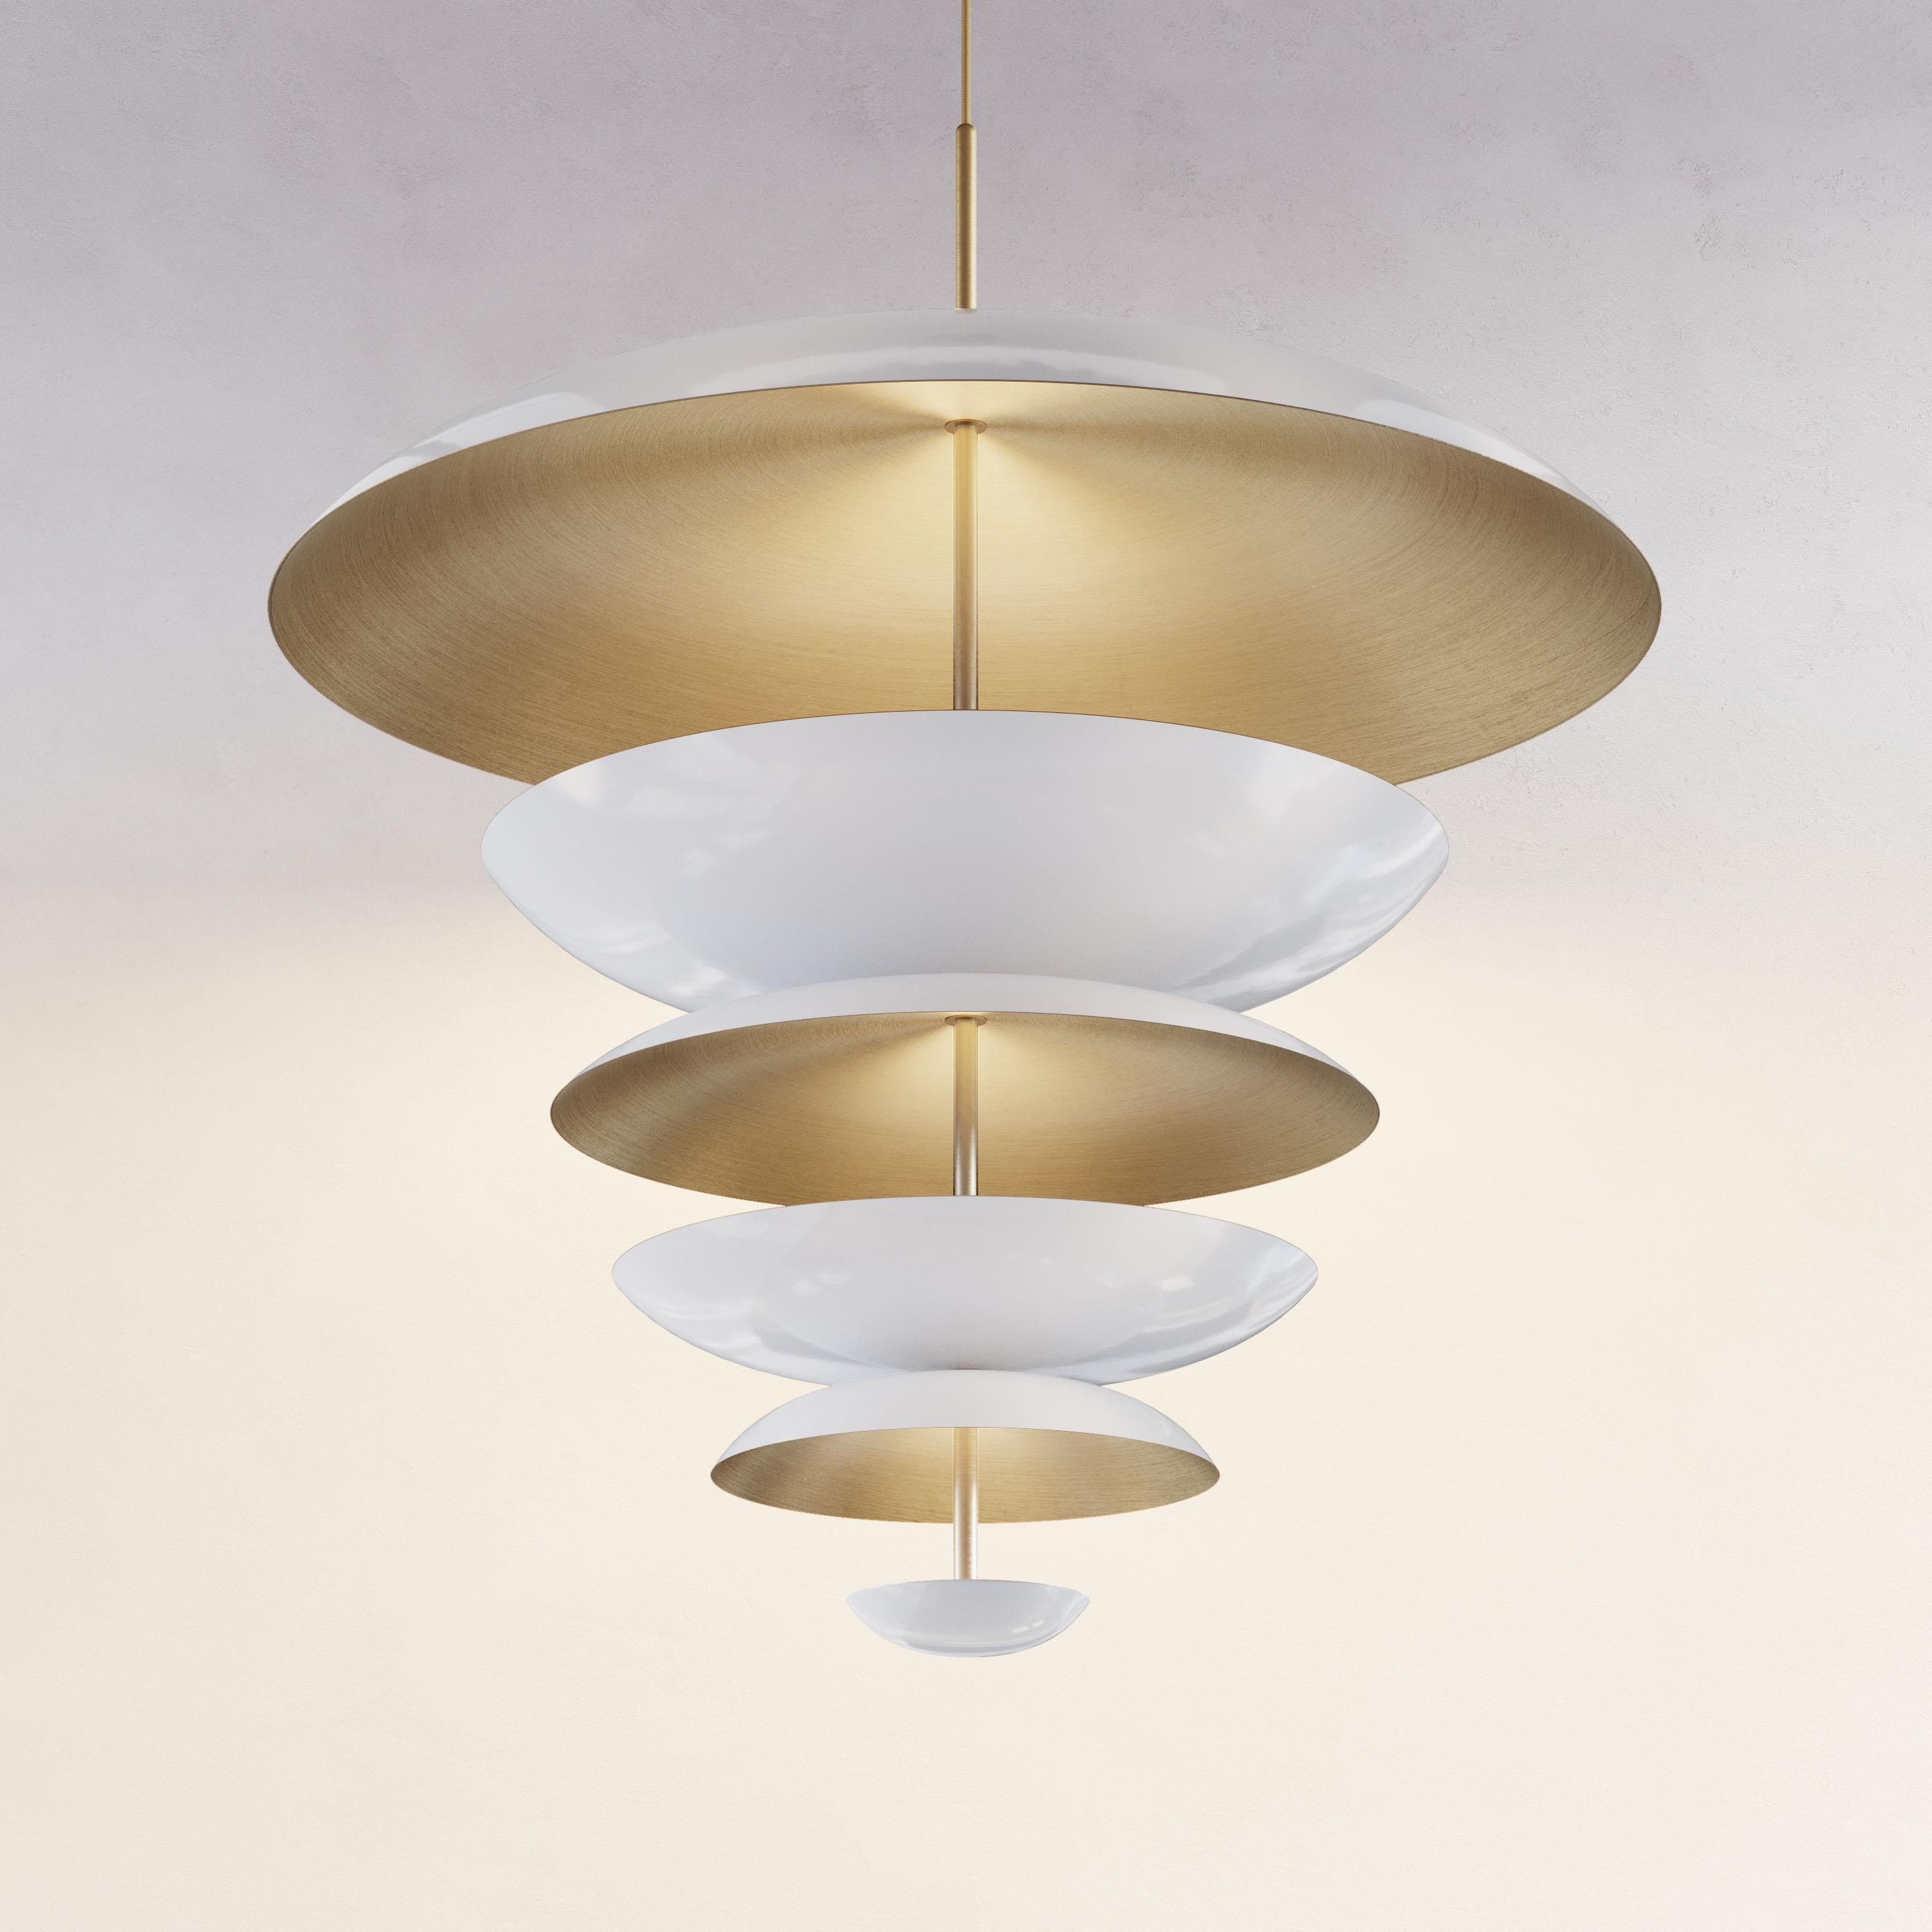 Finely hand-spun brass plates make up this pendant light. One side is finished in either a gloss white or matt white piano lacquer and the inside finely brushed brass. The light is projected into the shade and reflects out, illuminating without